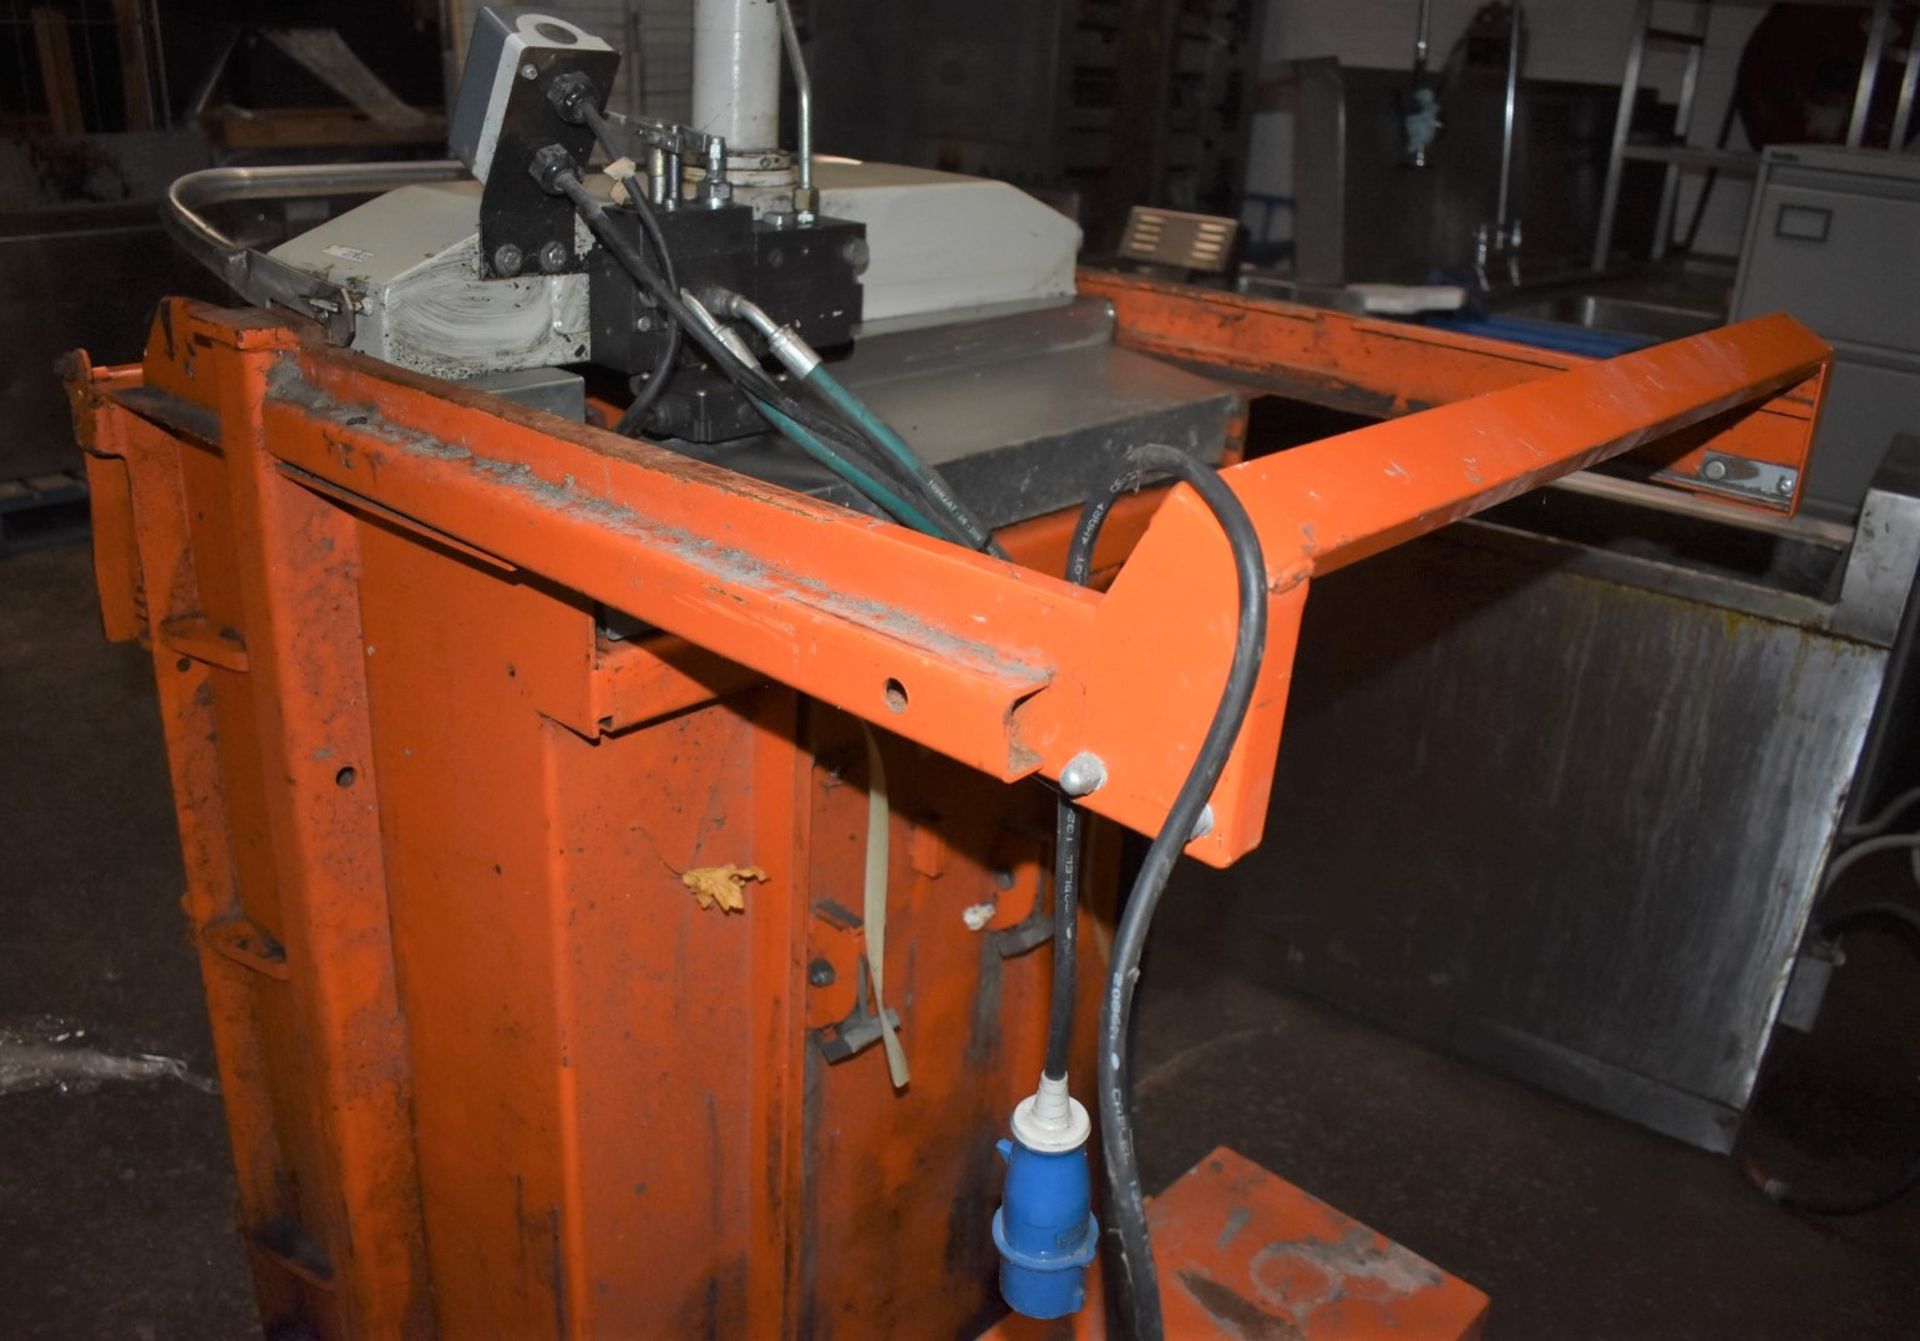 1 x Orwak 5010 Hydraulic Press Compact Cardboard Baler - Used For Compacting Recyclable or Non- - Image 12 of 15